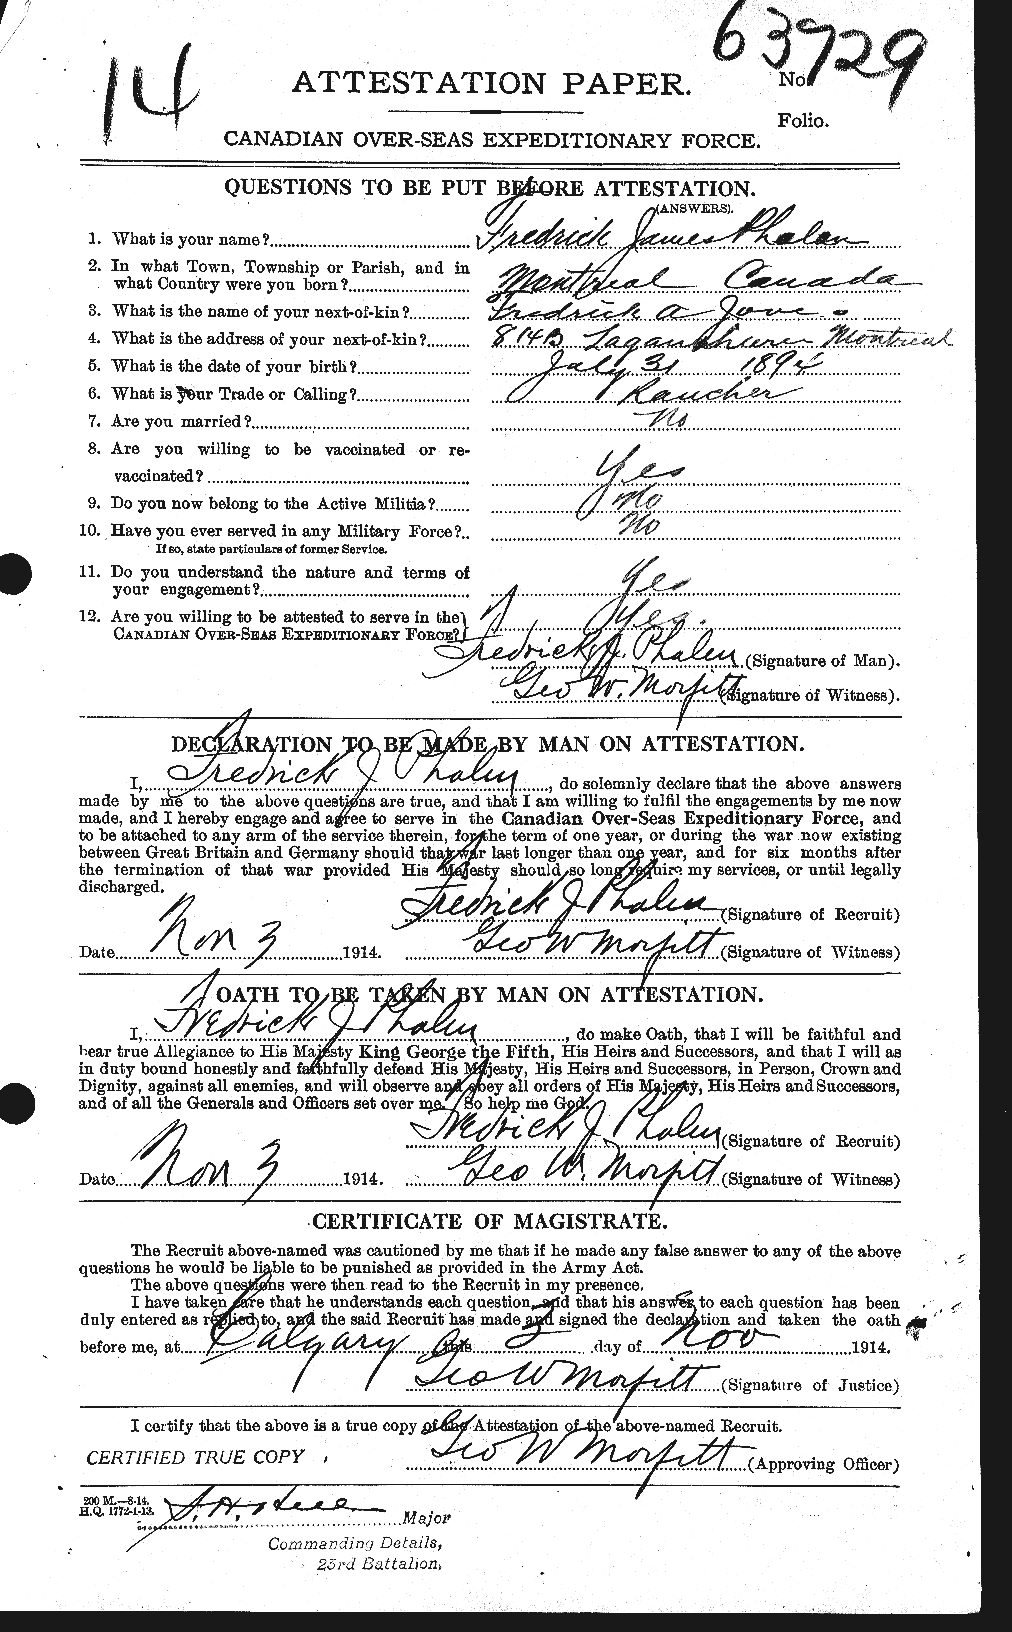 Personnel Records of the First World War - CEF 576840a